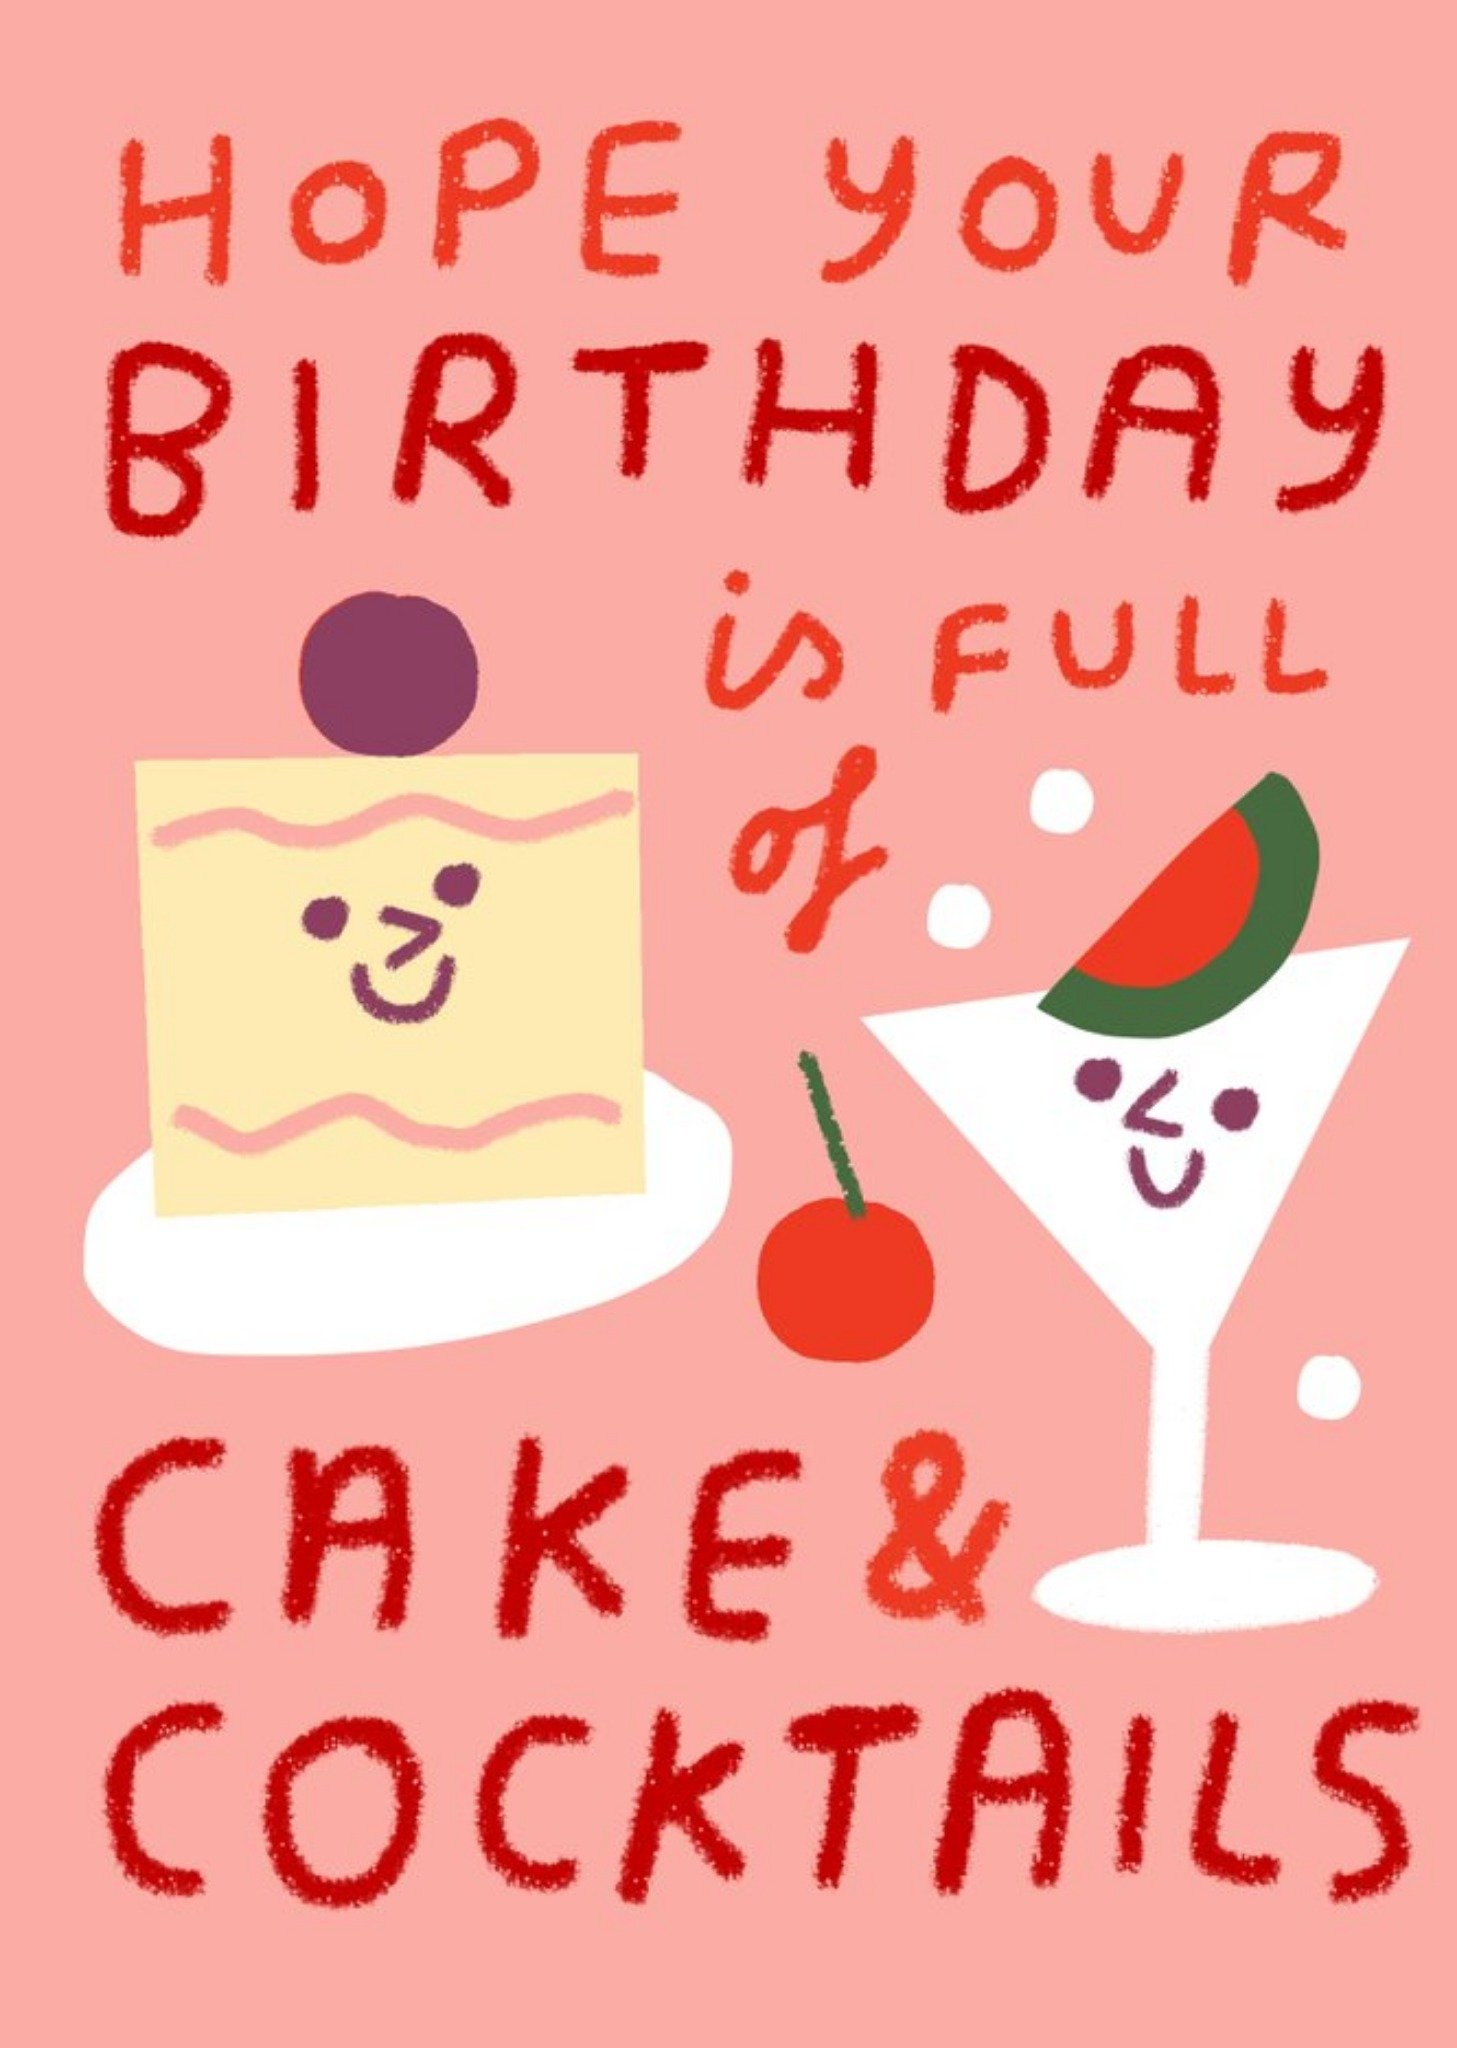 Moonpig Happy Birthday Card For Her - Cake And Cocktails Ecard